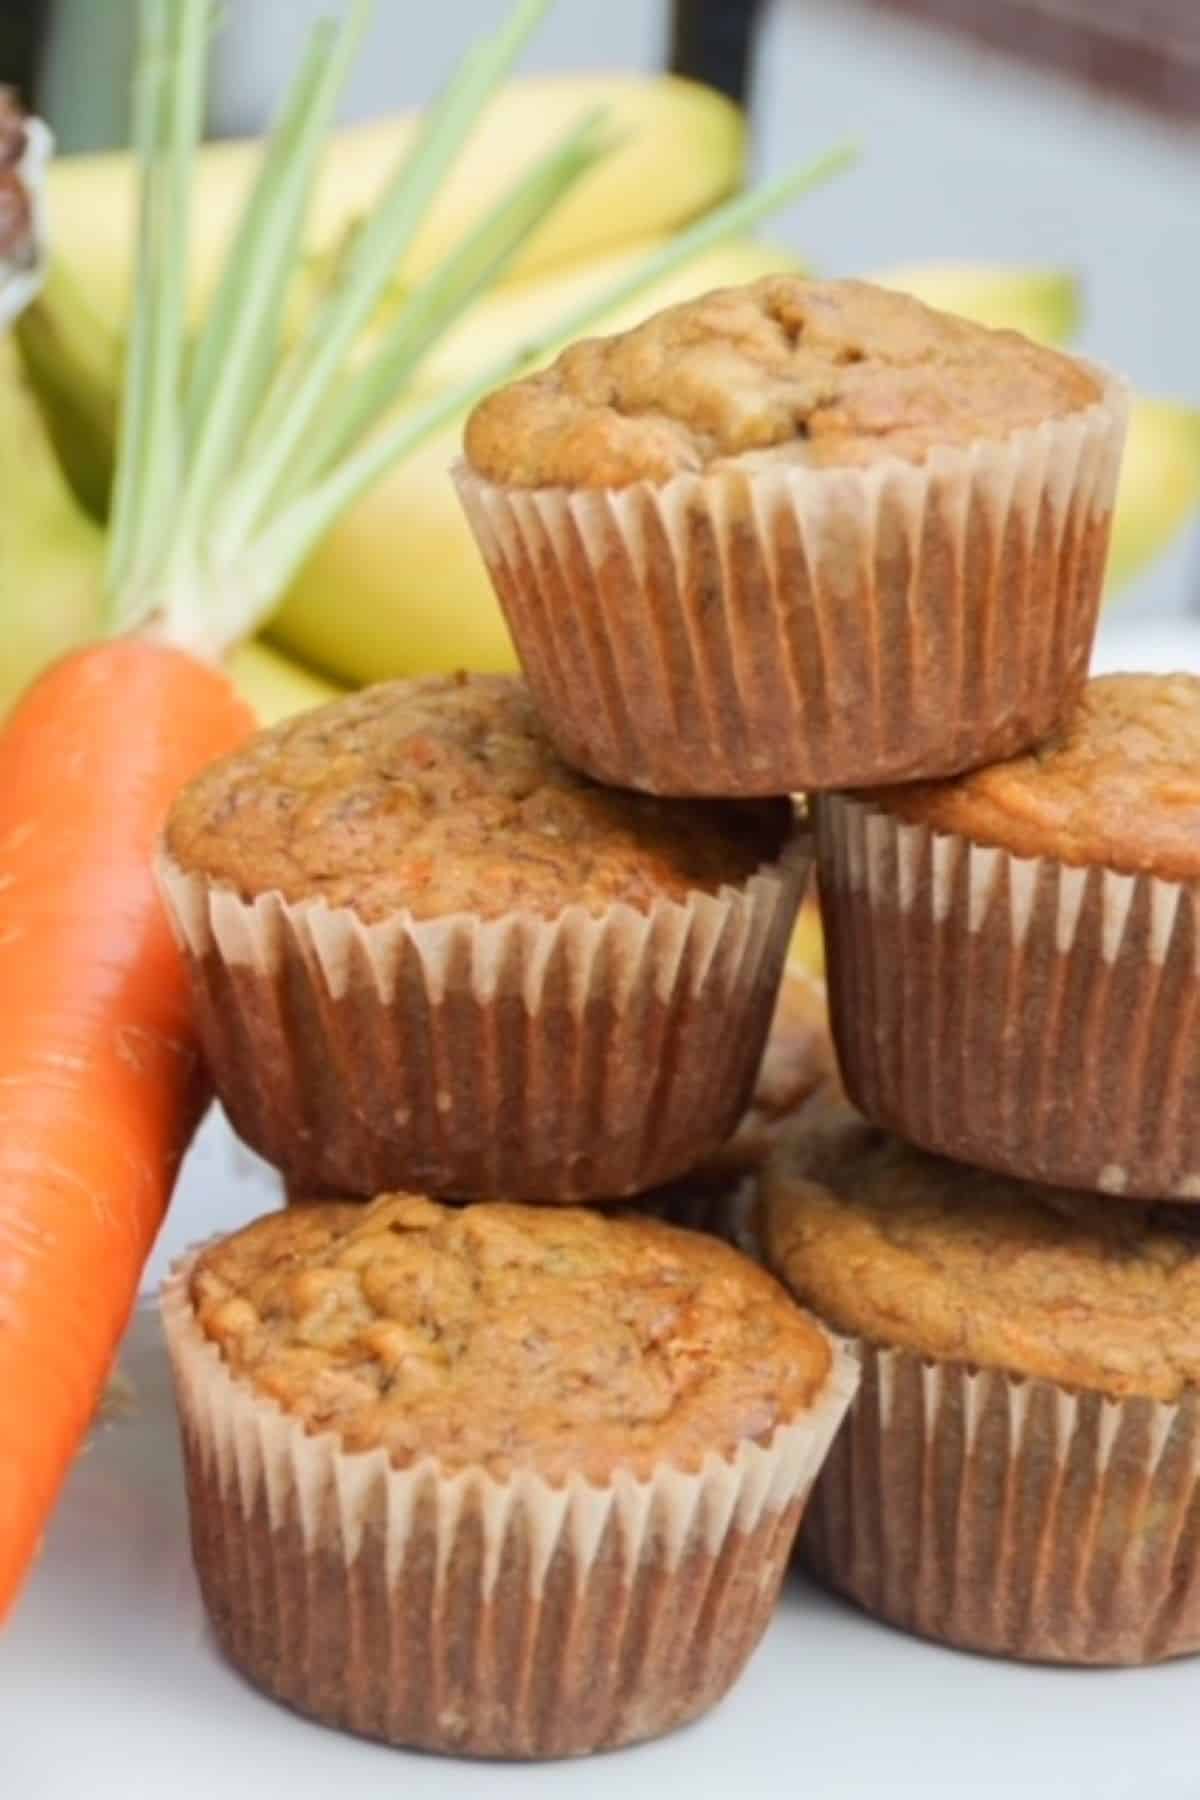 Stacked muffins with a carrot and bananas in the background